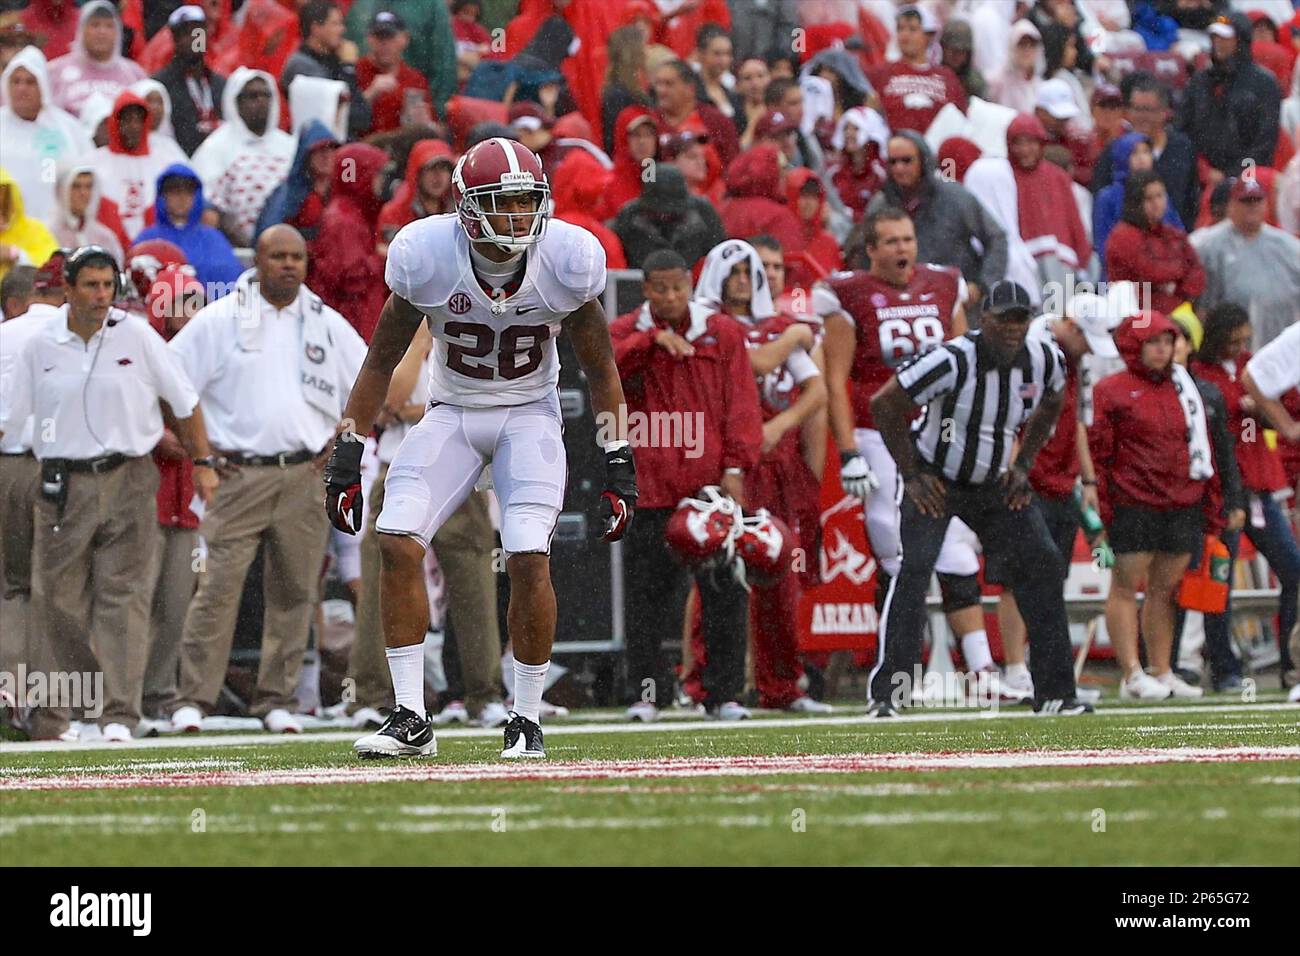 Sep 15, 2012: Alabama corner back Dee Milliner #28 drops into coverage. The  Crimson Tide defeated the Razorbacks 52-0 at Donald W. Reynolds Stadium in  Fayetteville , AR. Richey Miller/CSM (Cal Sport